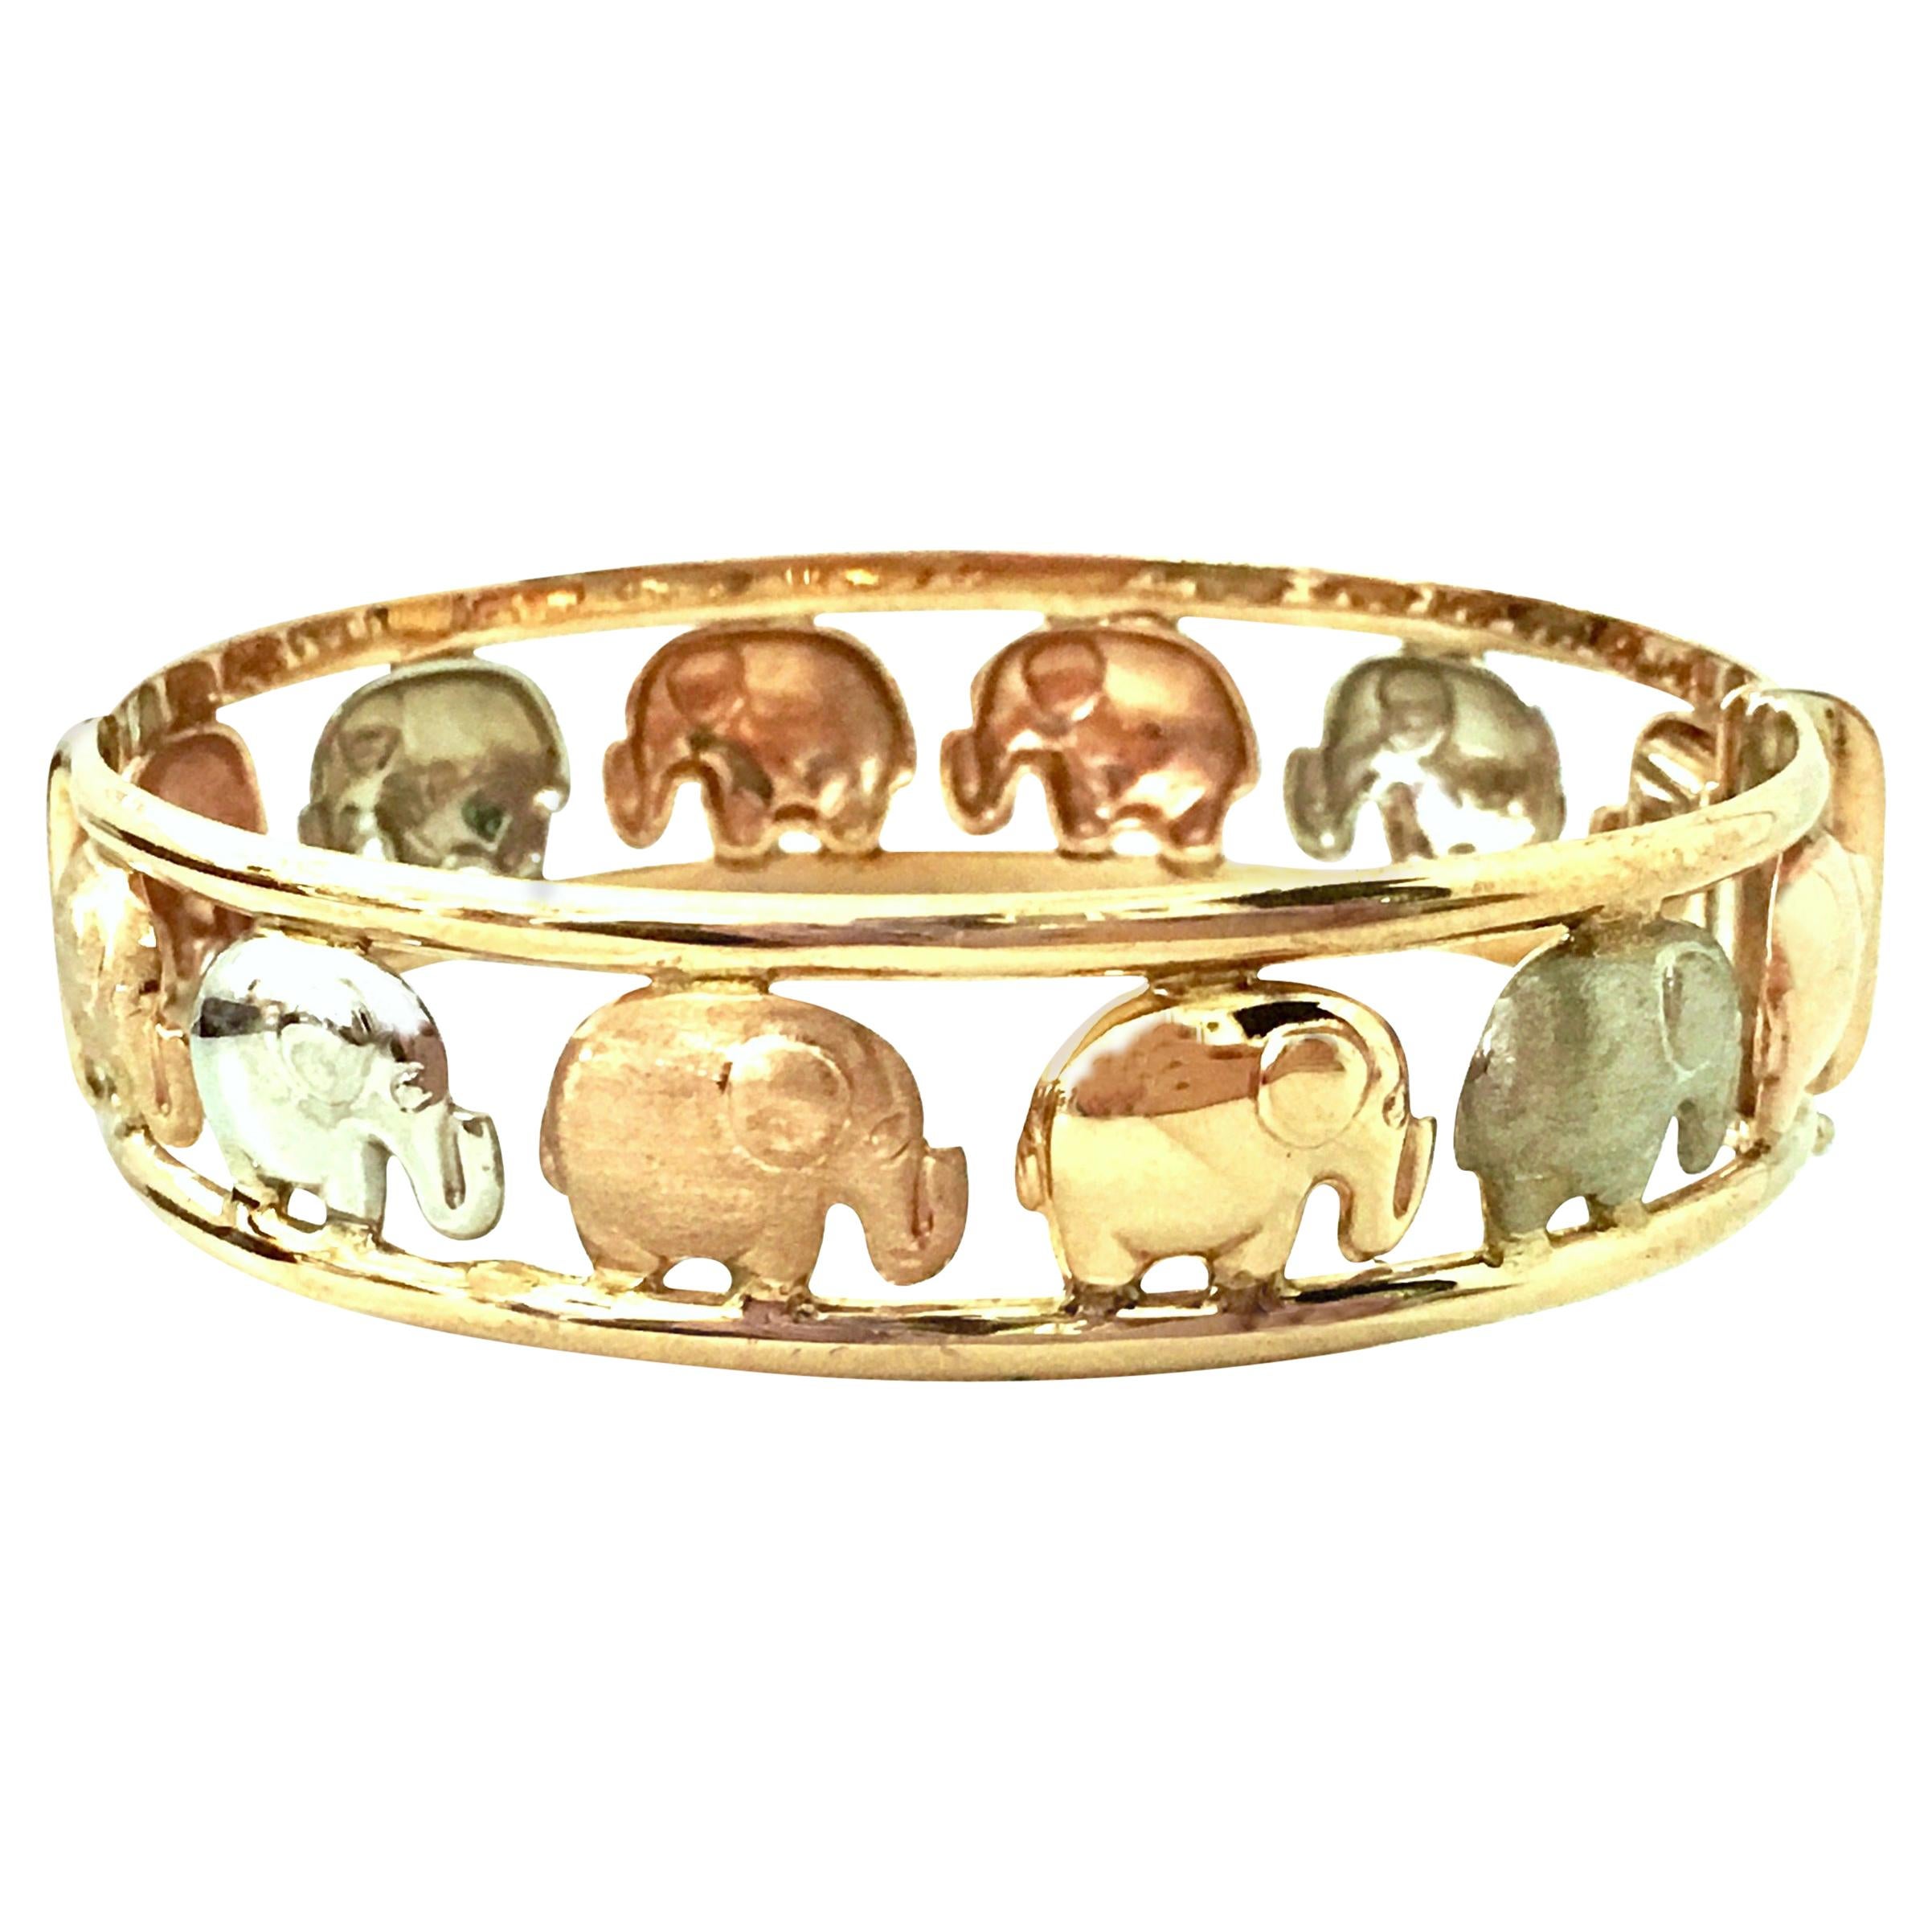 Woman's 14k white rose yellow gold good luck Elephant Bracelet 7.25 Inches Long 